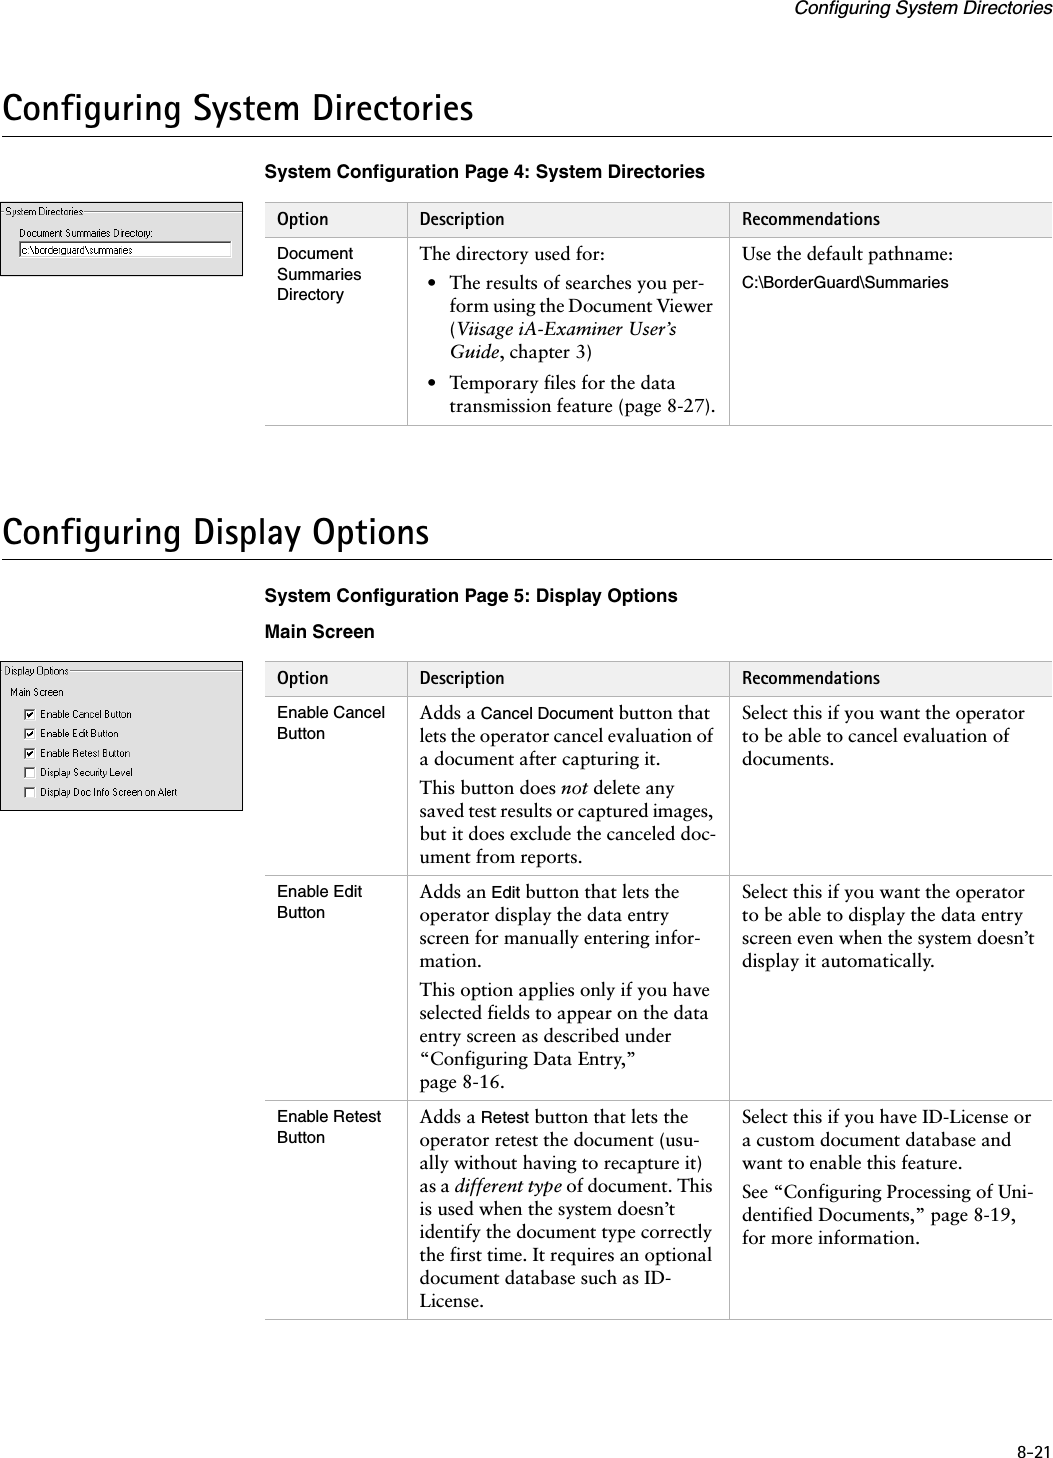 8-21Configuring System DirectoriesConfiguring System DirectoriesSystem Configuration Page 4: System DirectoriesConfiguring Display OptionsSystem Configuration Page 5: Display OptionsMain ScreenOption Description RecommendationsDocument Summaries DirectoryThe directory used for:• The results of searches you per-form using the Document Viewer (Viisage iA-Examiner User’s Guide, chapter 3)• Temporary files for the data transmission feature (page 8-27).Use the default pathname:C:\BorderGuard\SummariesOption Description RecommendationsEnable Cancel ButtonAdds a Cancel Document button that lets the operator cancel evaluation of a document after capturing it.This button does not delete any saved test results or captured images, but it does exclude the canceled doc-ument from reports.Select this if you want the operator to be able to cancel evaluation of documents.Enable Edit ButtonAdds an Edit button that lets the operator display the data entry screen for manually entering infor-mation.This option applies only if you have selected fields to appear on the data entry screen as described under “Configuring Data Entry,” page 8-16.Select this if you want the operator to be able to display the data entry screen even when the system doesn’t display it automatically.Enable Retest ButtonAdds a Retest button that lets the operator retest the document (usu-ally without having to recapture it) as a different type of document. This is used when the system doesn’t identify the document type correctly the first time. It requires an optional document database such as ID-License.Select this if you have ID-License or a custom document database and want to enable this feature.See “Configuring Processing of Uni-dentified Documents,” page 8-19, for more information.